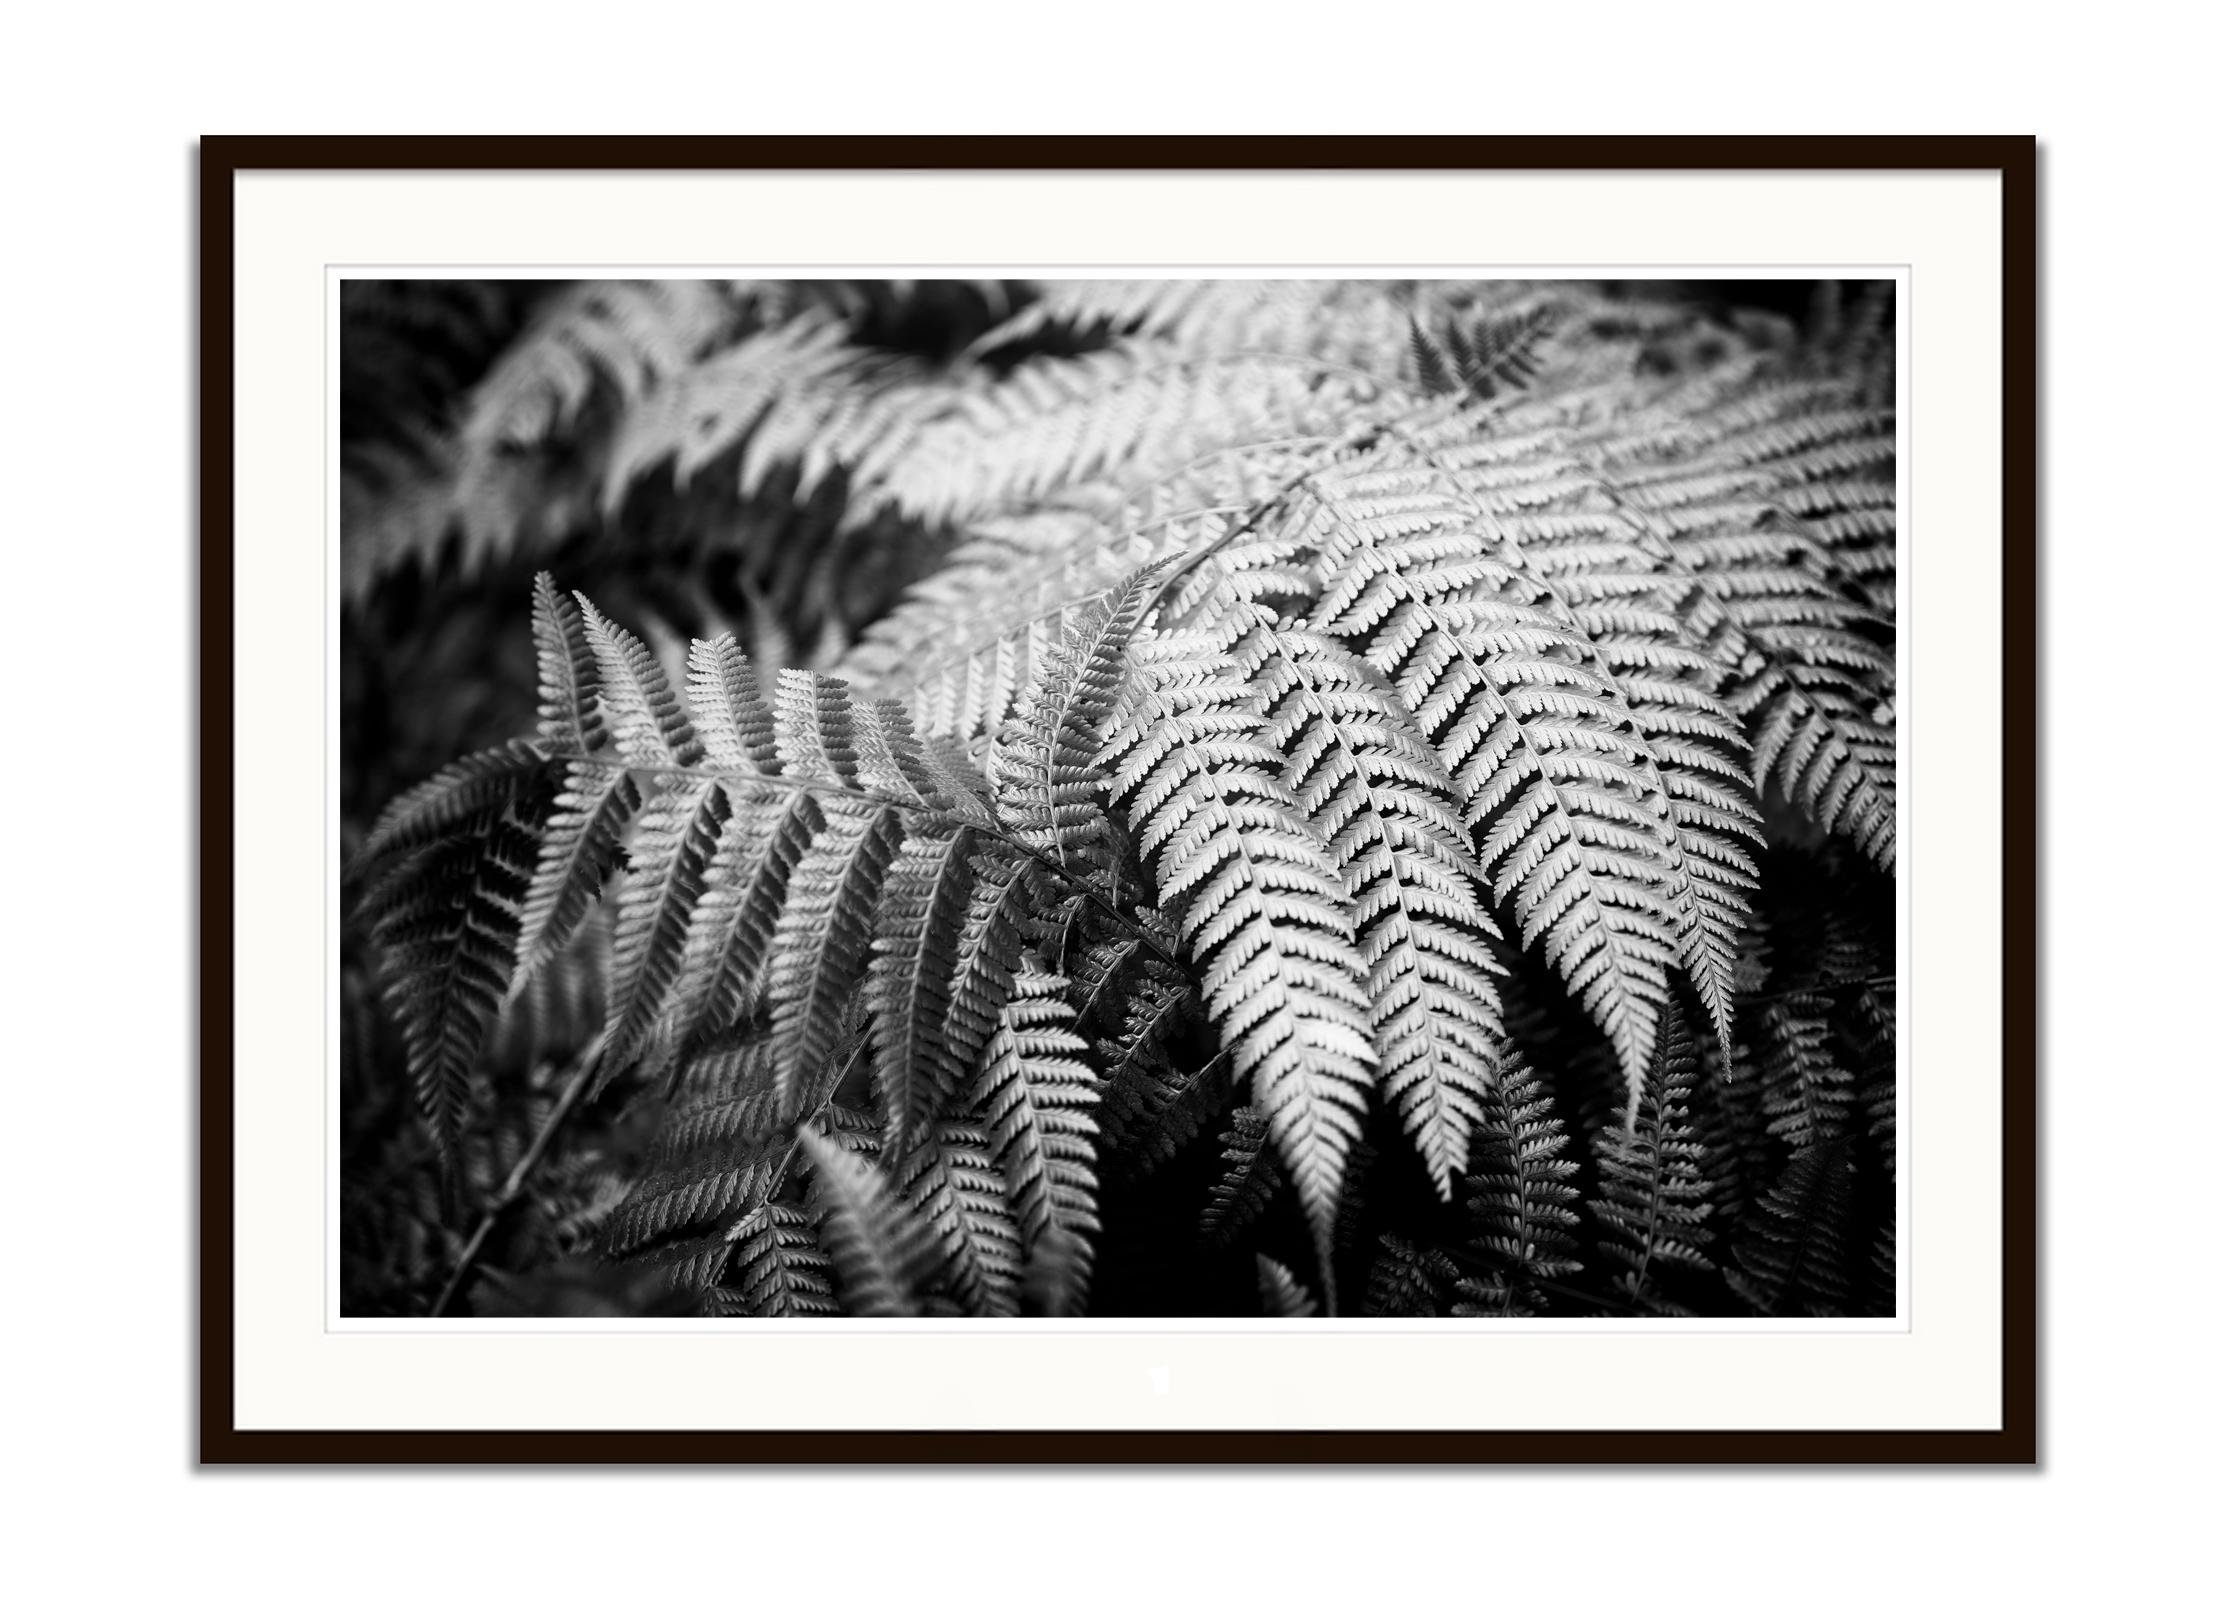 Polypodiopsida, Spain, black and white fine art photography, landscape, flora - Black Black and White Photograph by Gerald Berghammer